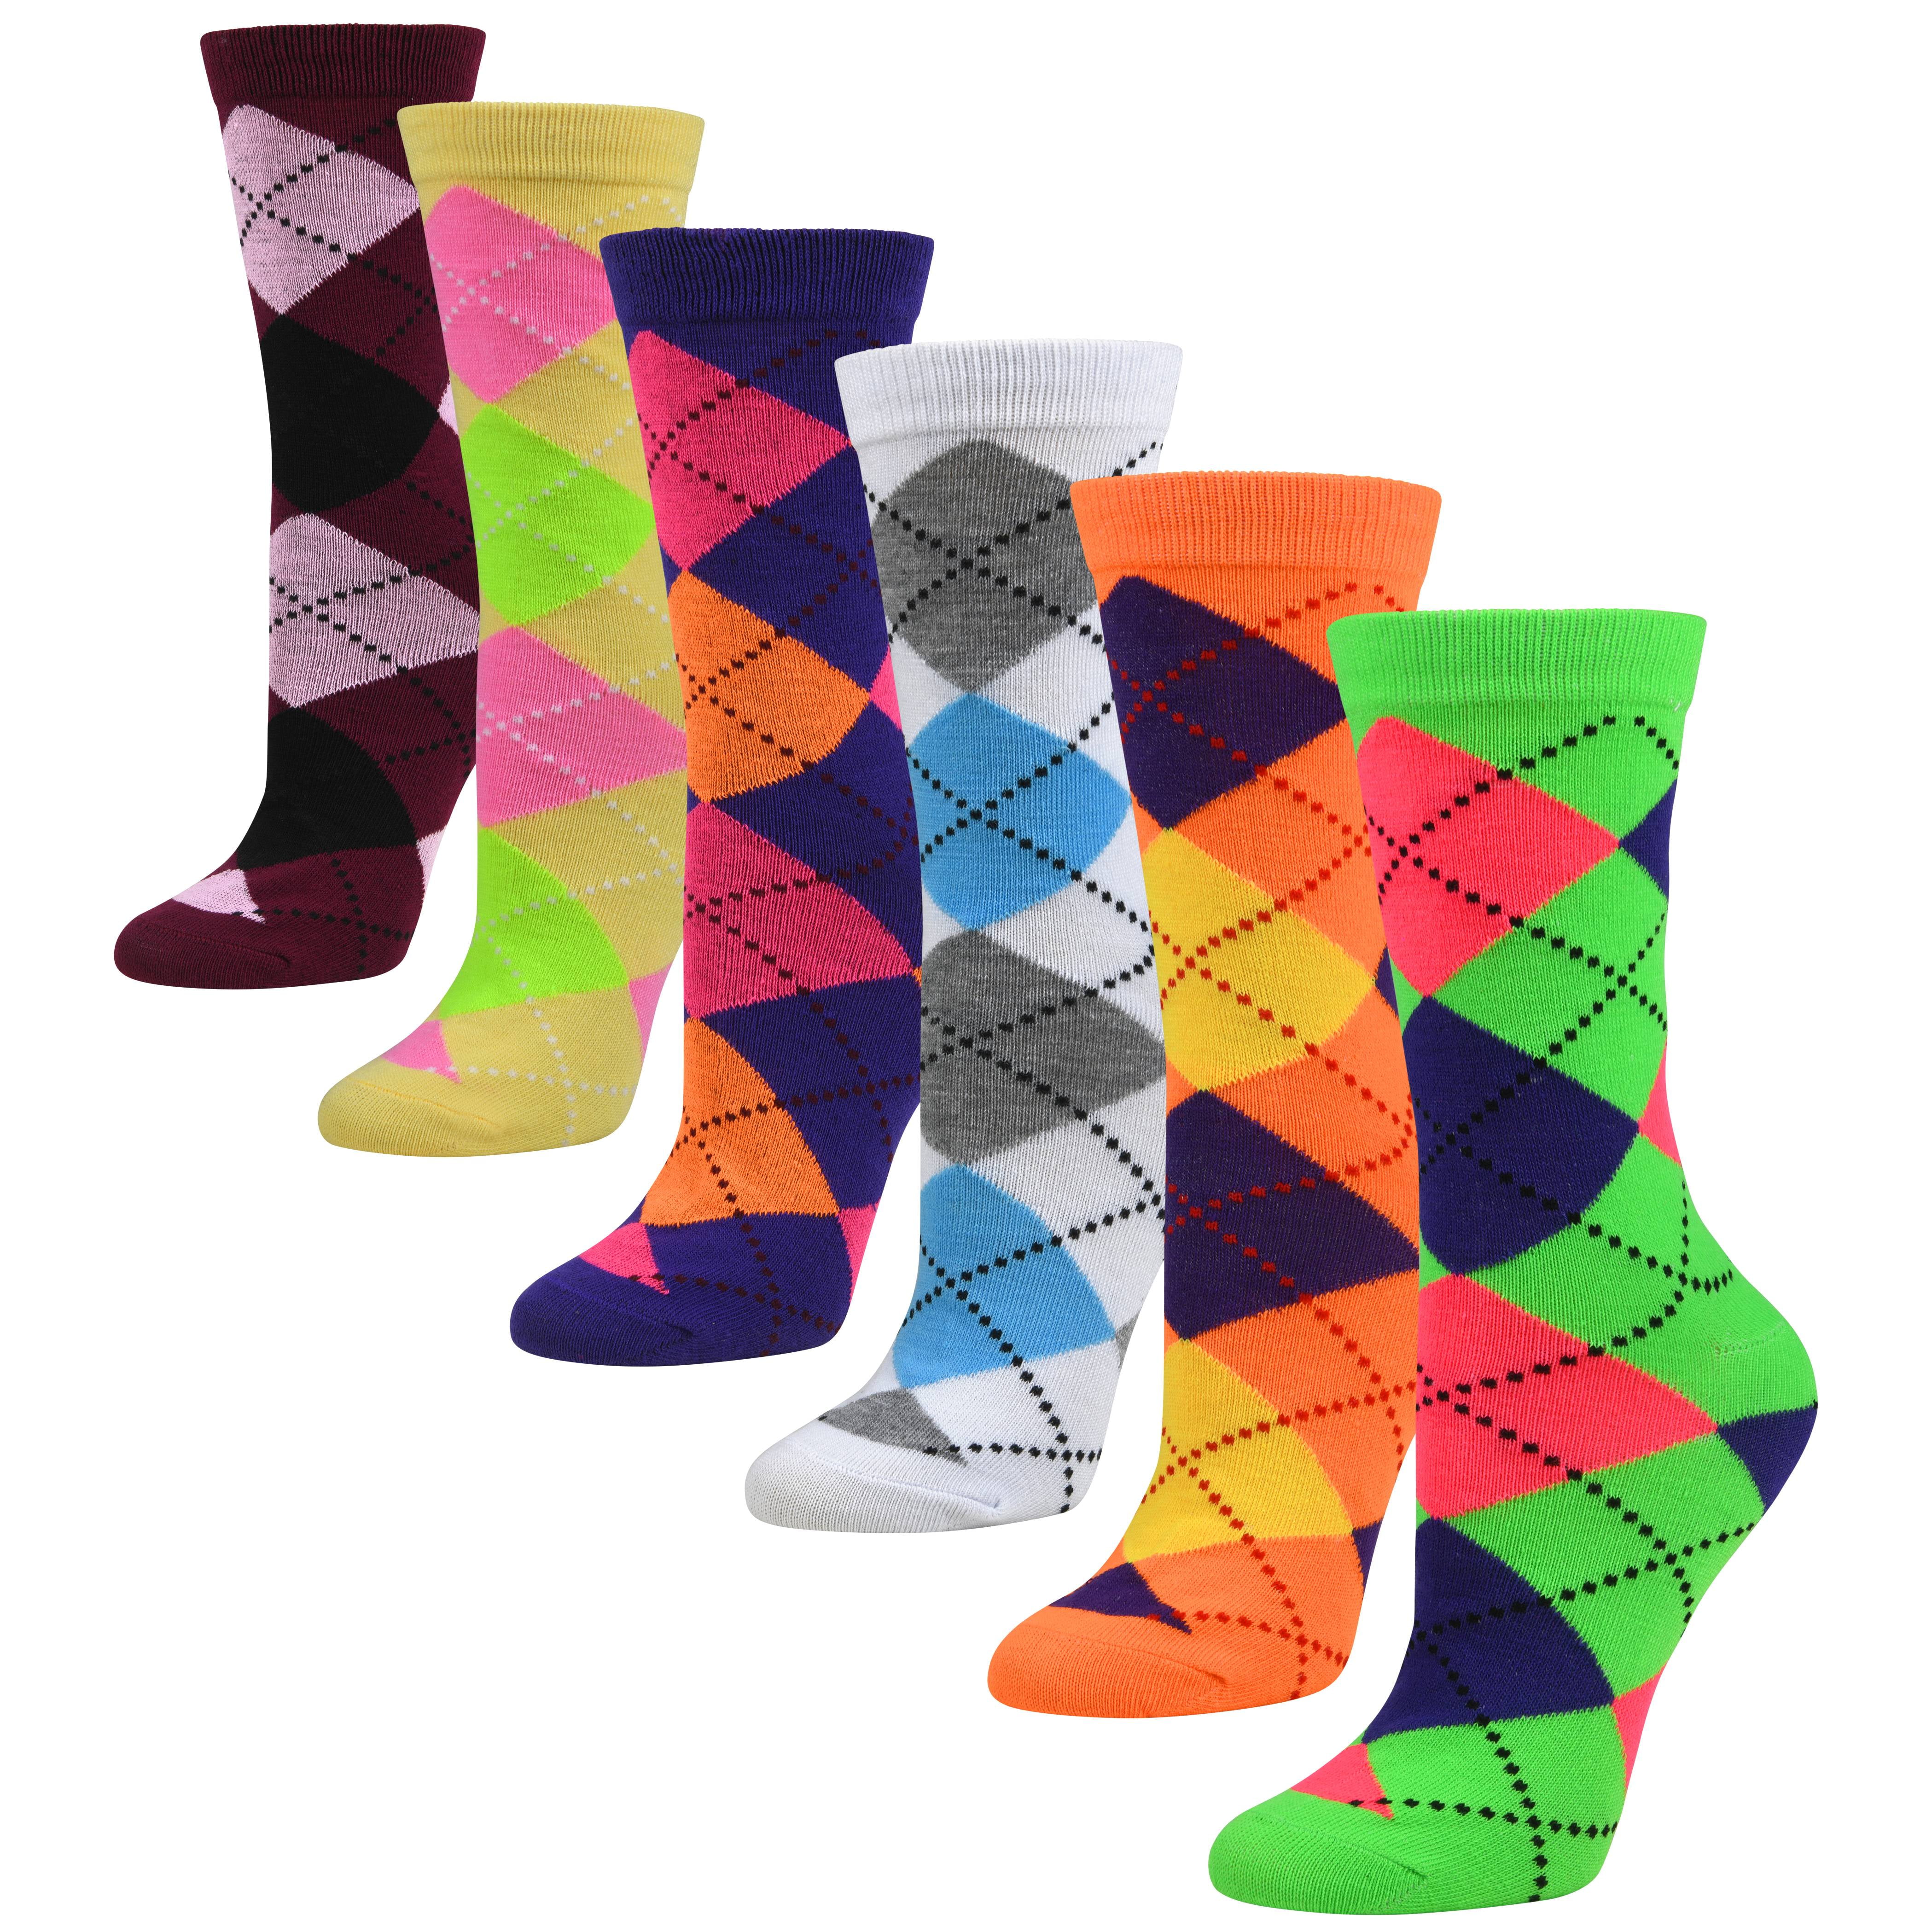 6 Pairs Mens Dress Socks Cotton Colorful Argyle Socks Patterned With Gift Box Debra Weitzner 